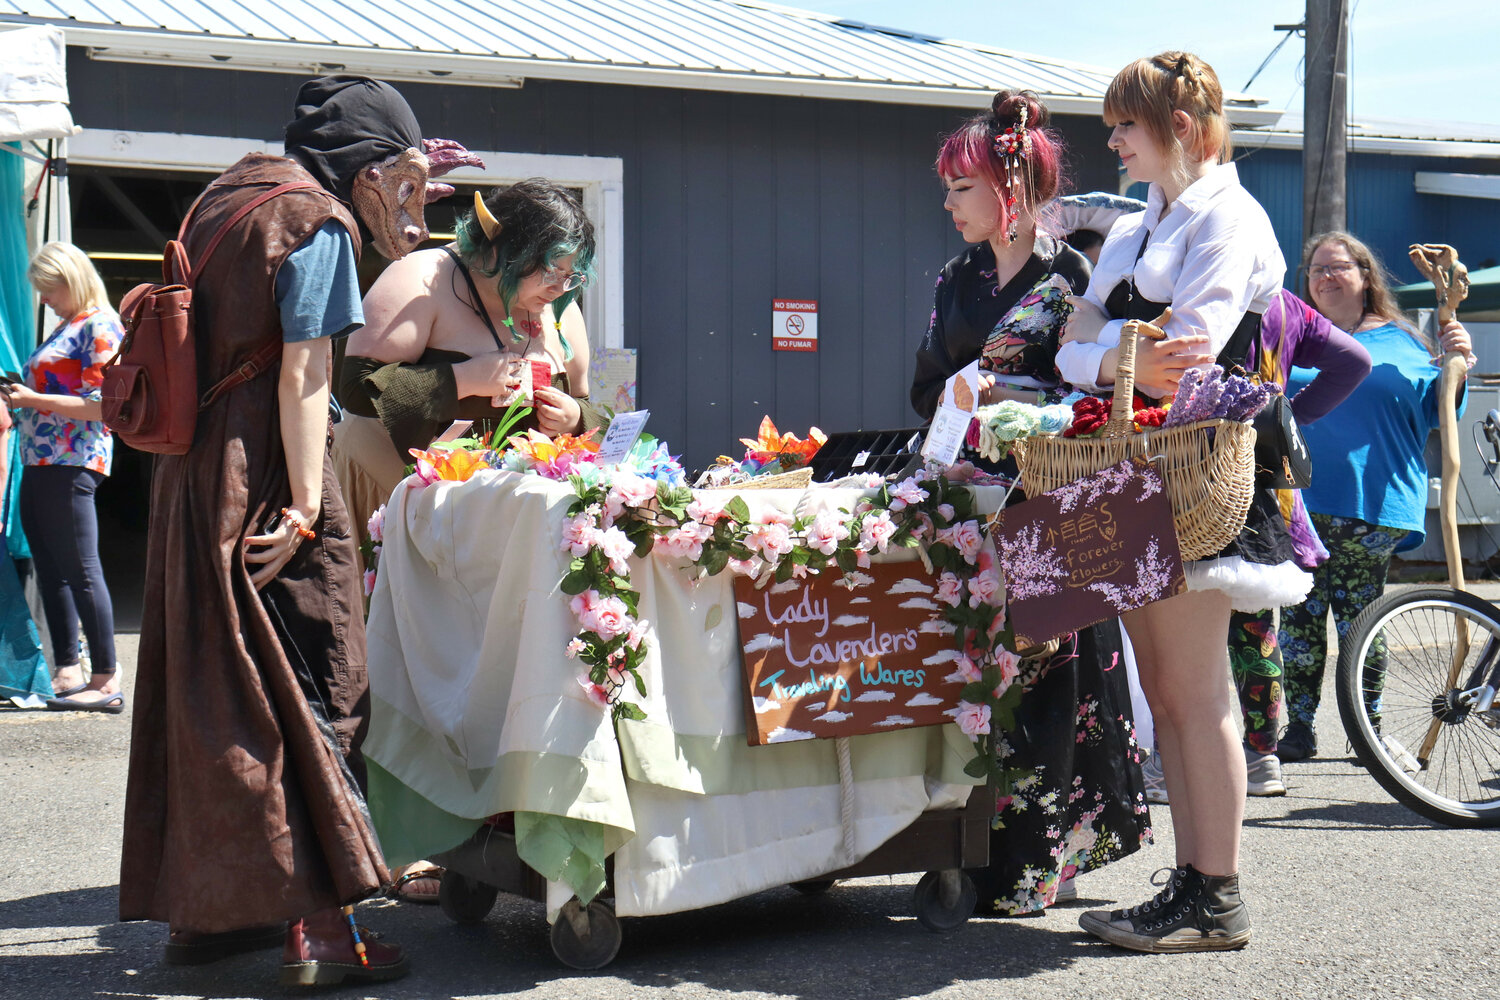 Alexis and Kat Thompson, right, peddle their wares during the Centralia Fantasy Festival at the Southwest Washington Fairgrounds in Chehalis on Saturday, May 27.